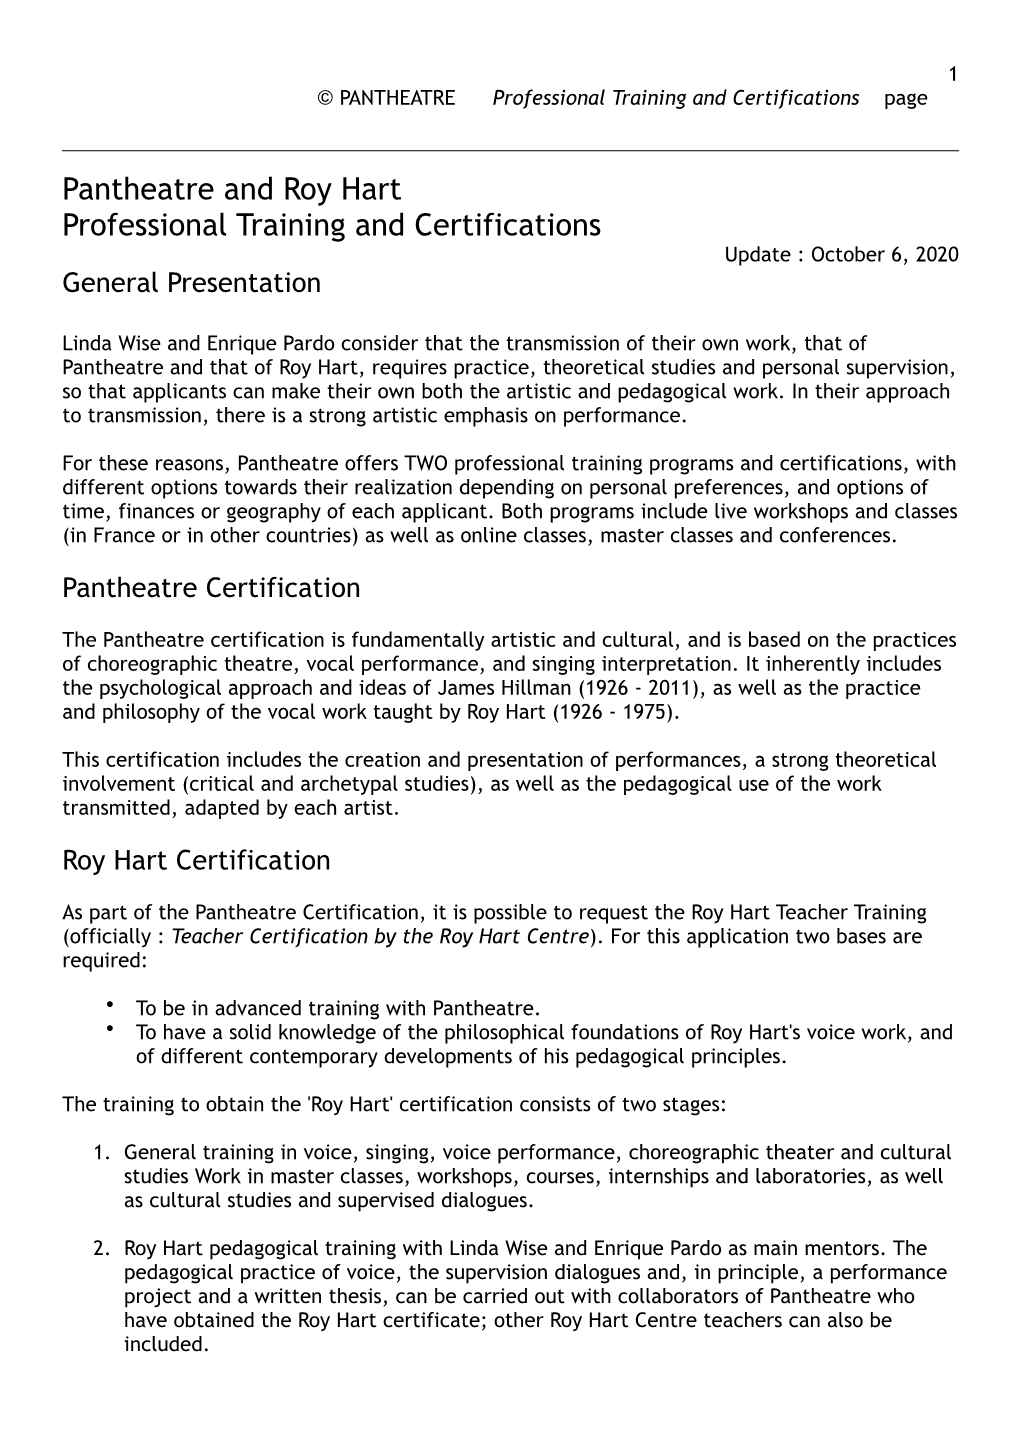 Pantheatre and Roy Hart Professional Training and Certifications Update : October 6, 2020 General Presentation